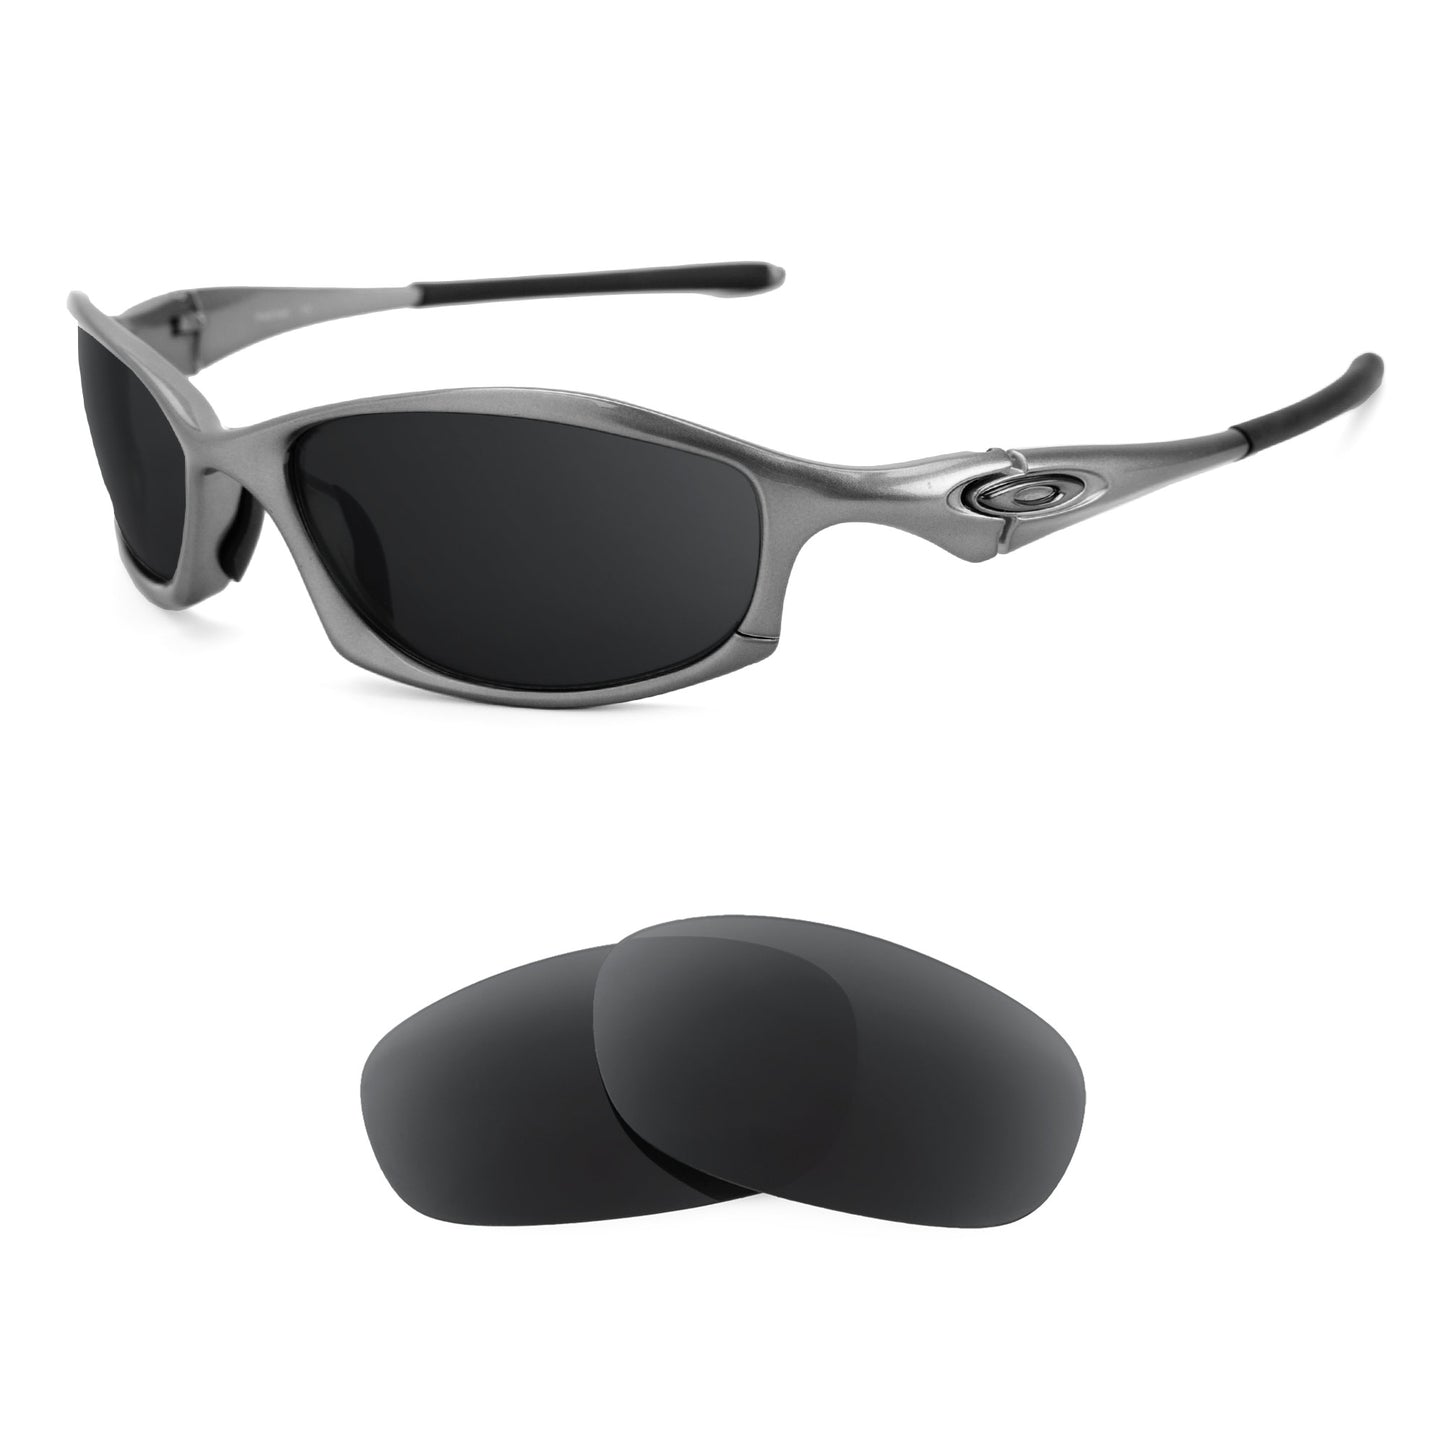 Oakley Hatchet sunglasses with replacement lenses